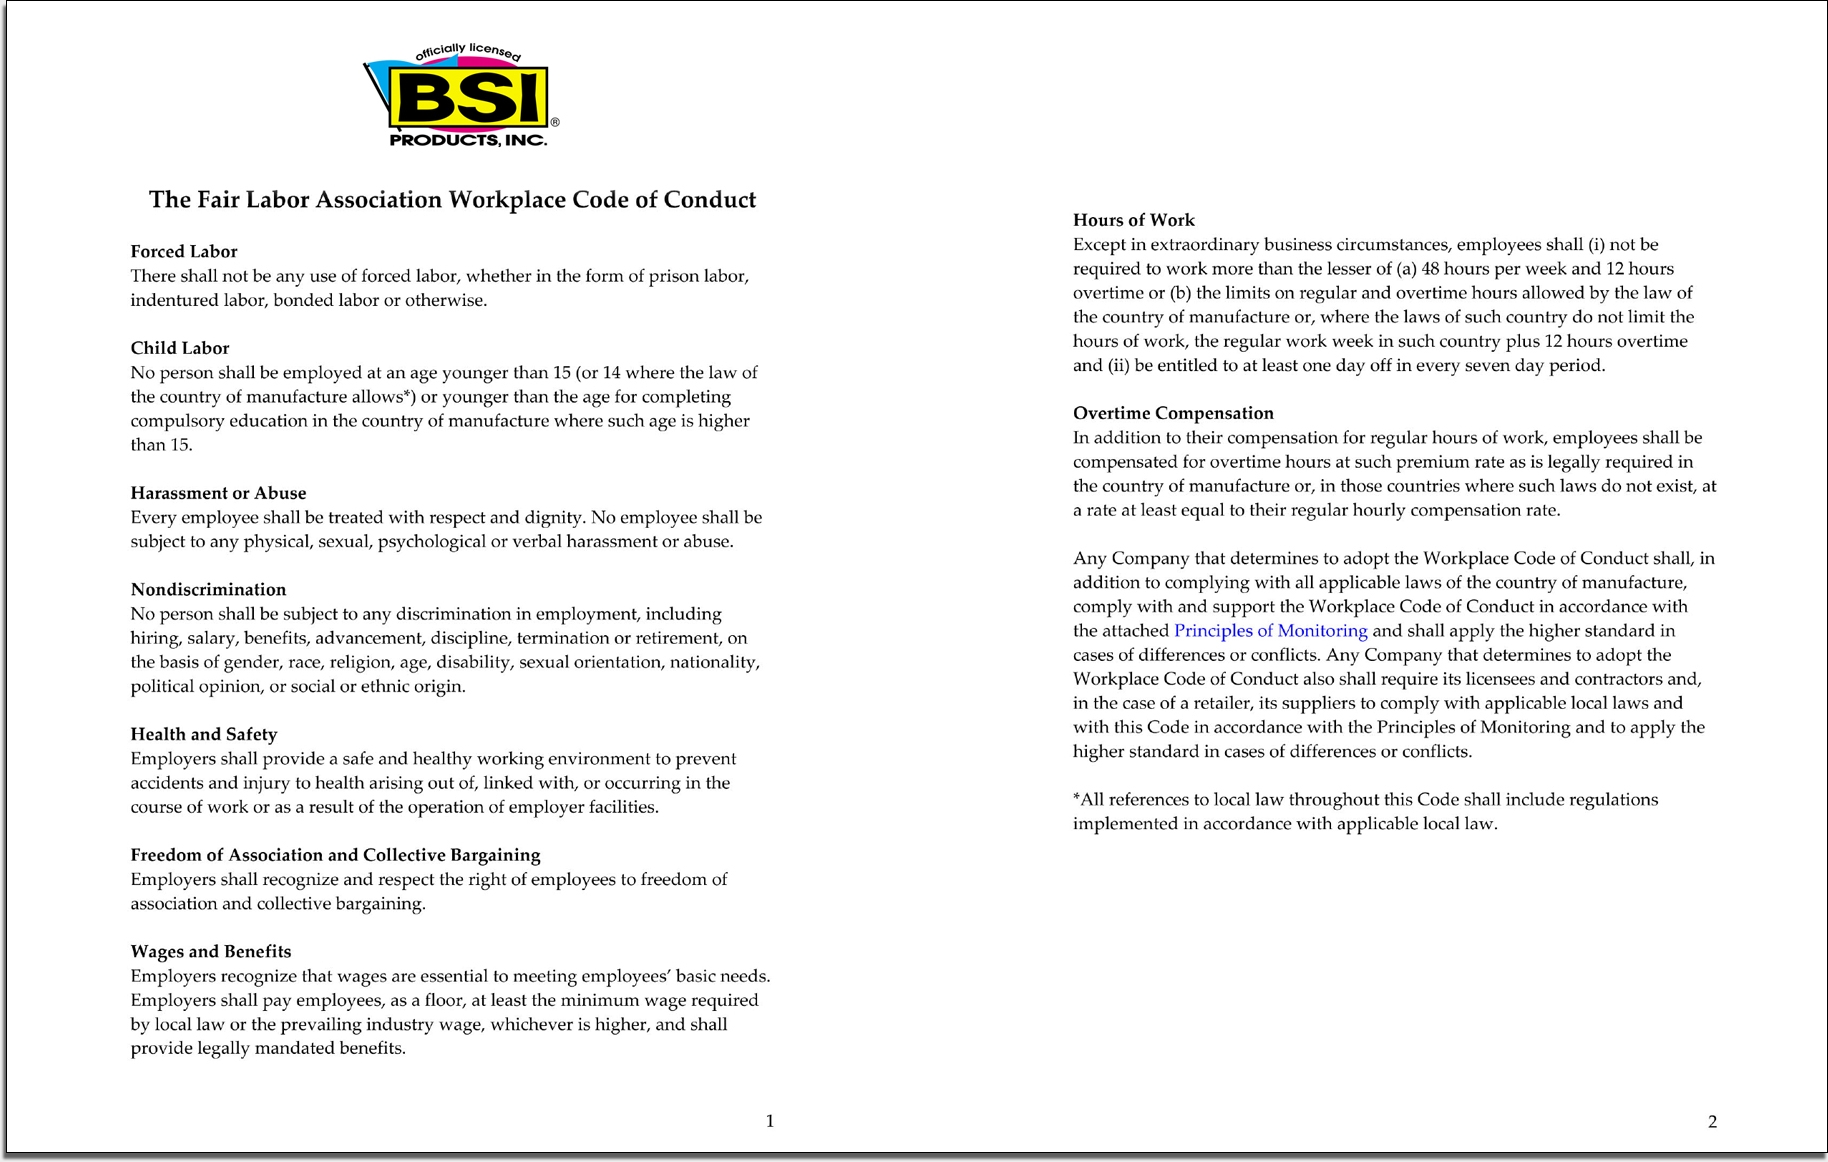 BSICodeofConductWEB, fair labor workplace code of conduct